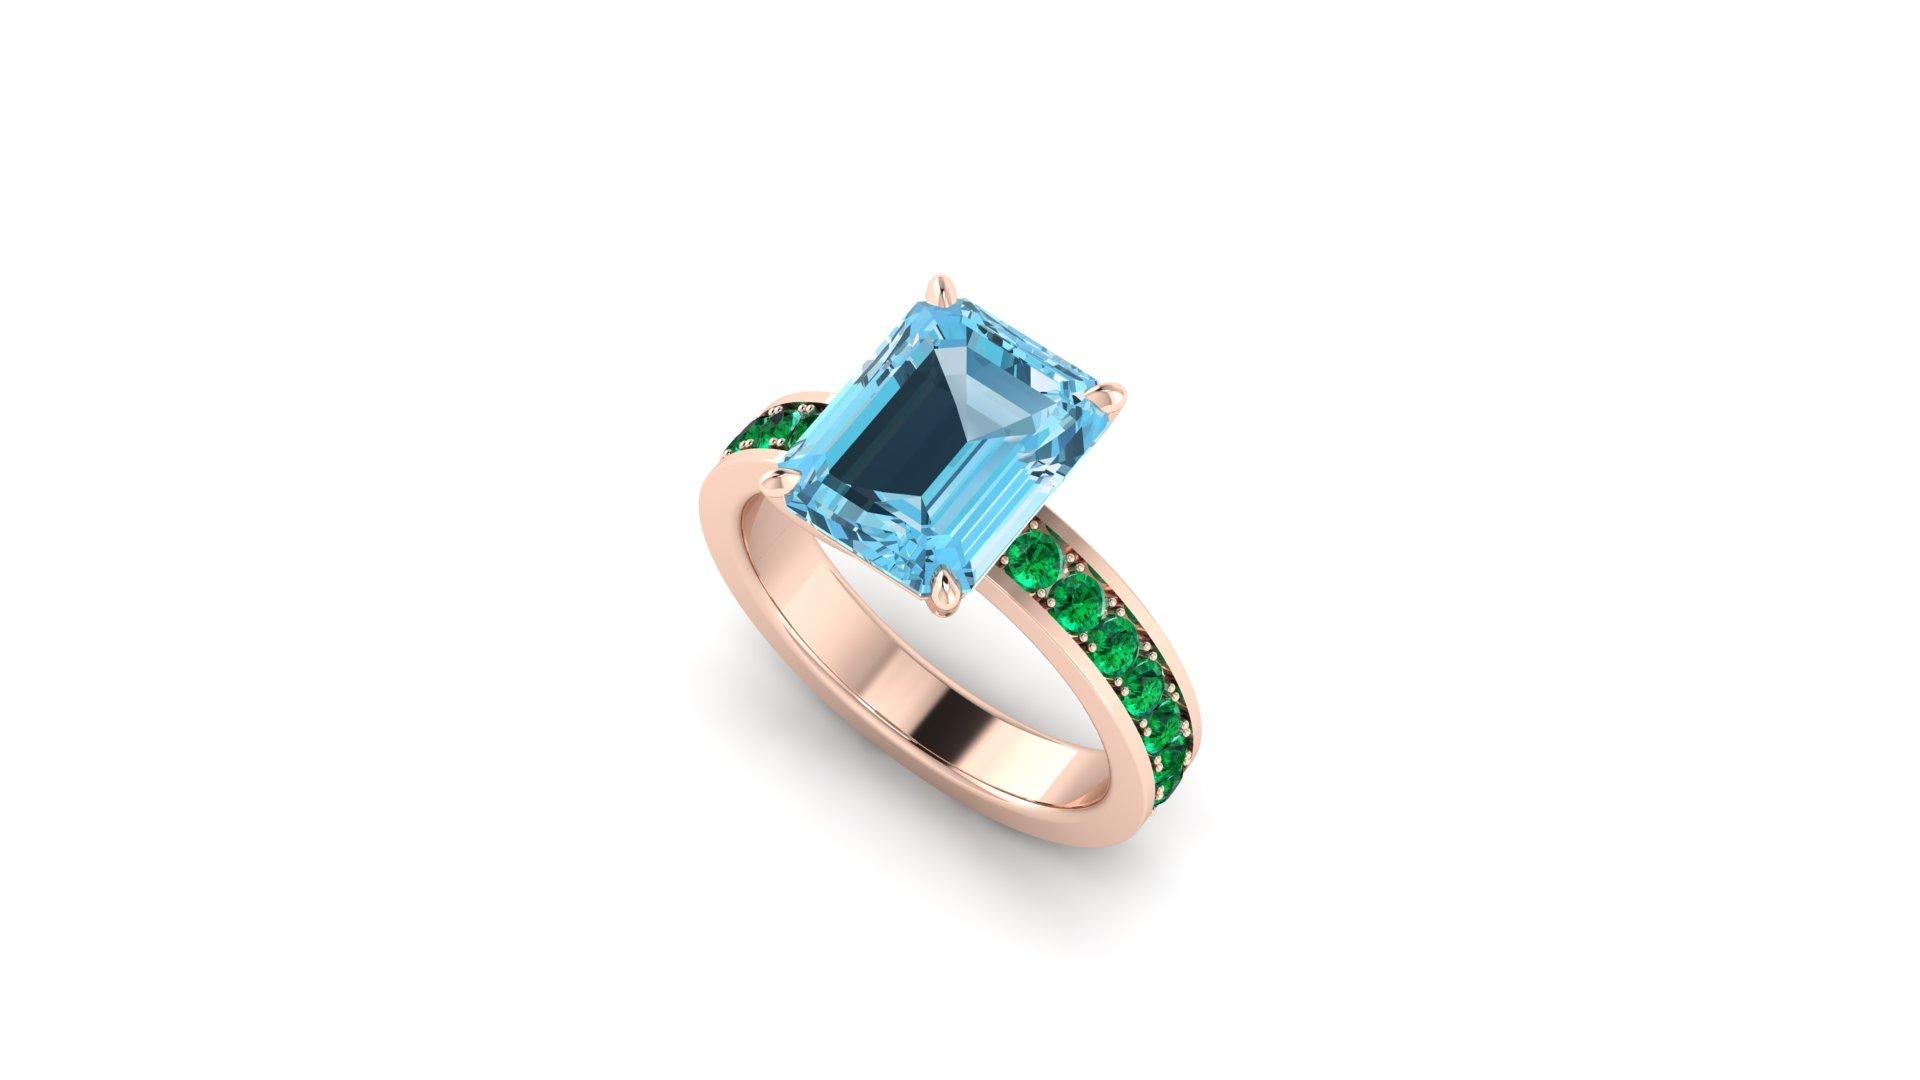 Natural Aquamarine 3.09 carats of intense blue, eye clean mineral, set in a 18k Rose gold custom made riing, showcasing a pave' half way down, of natural electric green Emeralds for an approximate total carat weight of 0.35 carats.
This ring is made